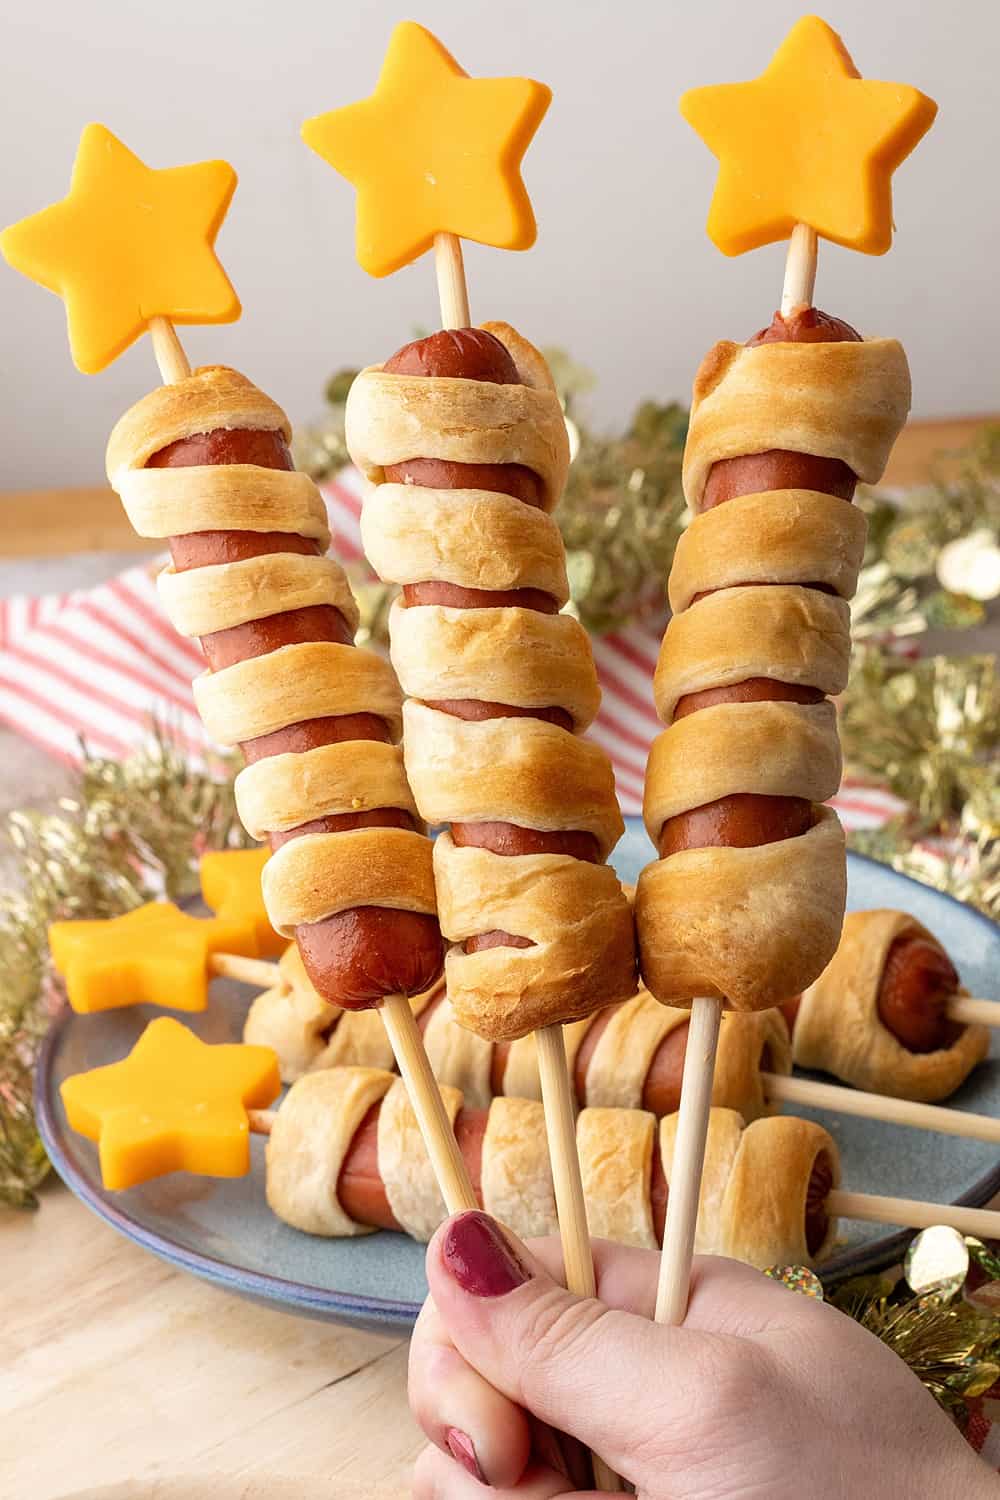 Firecracker Hot Dogs Are a Festive and Fun Food